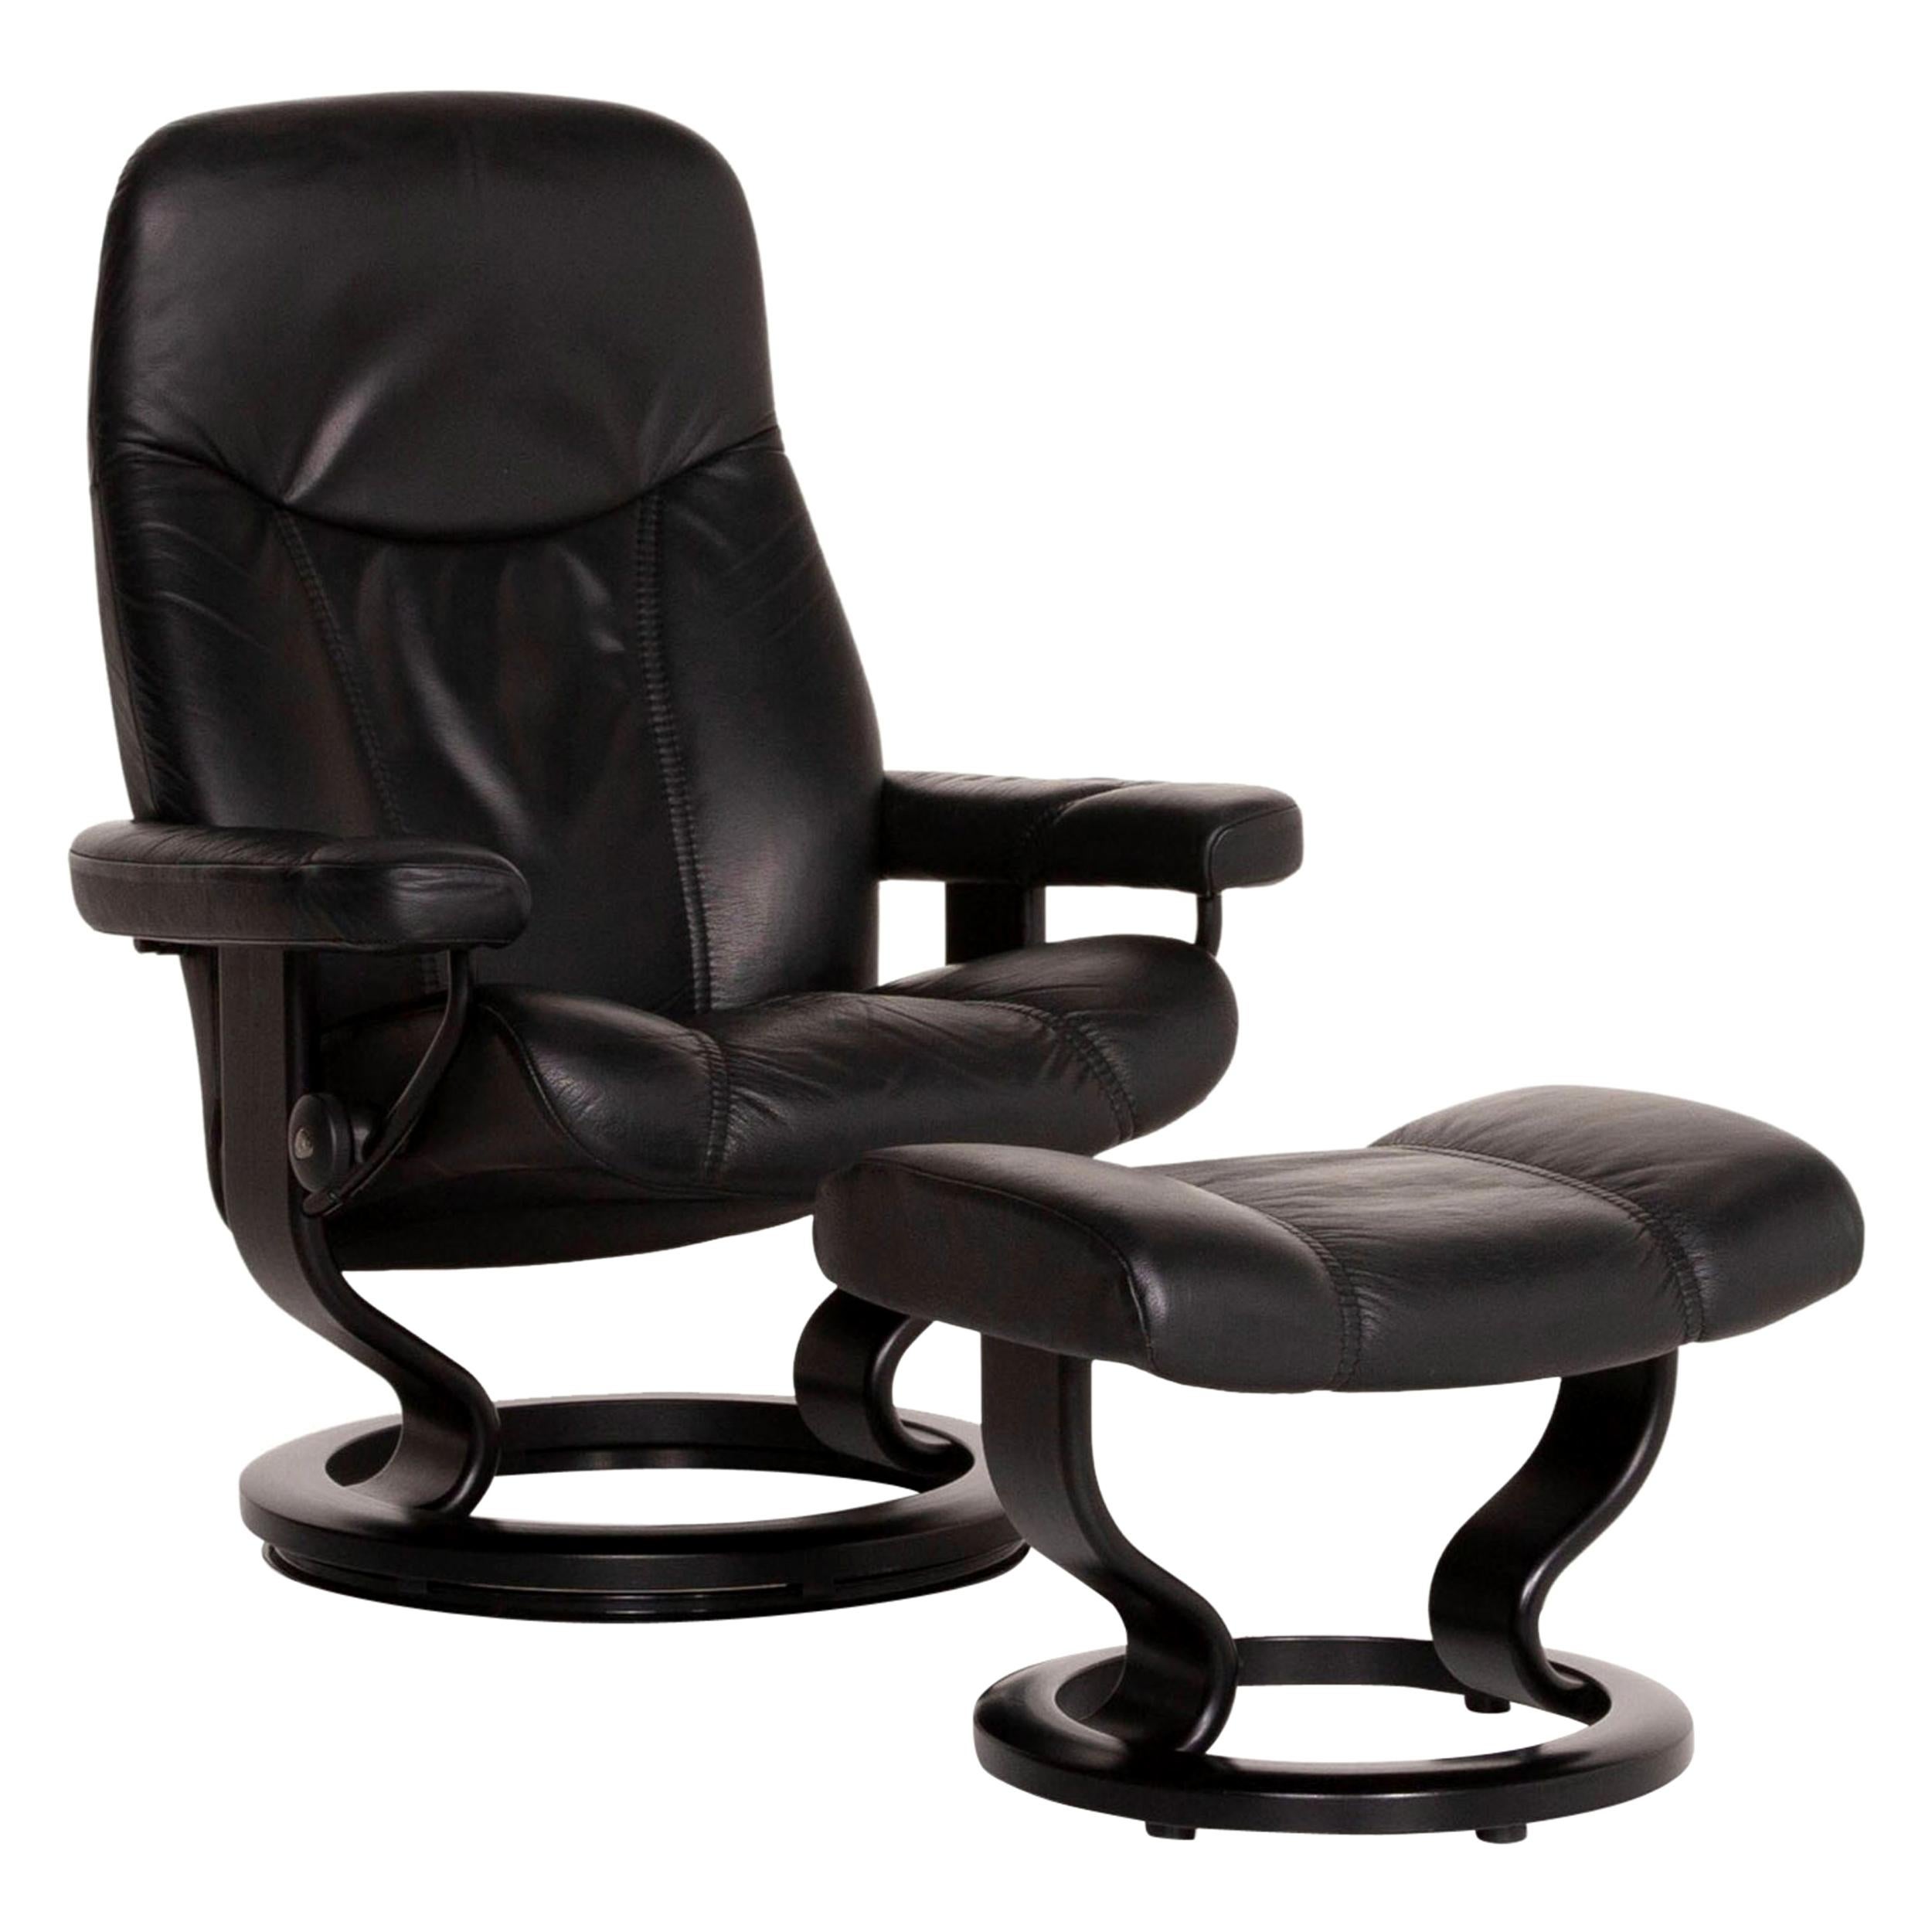 Stressless Consul Leather Armchair Incl. Stool Black Function Relaxation For Sale